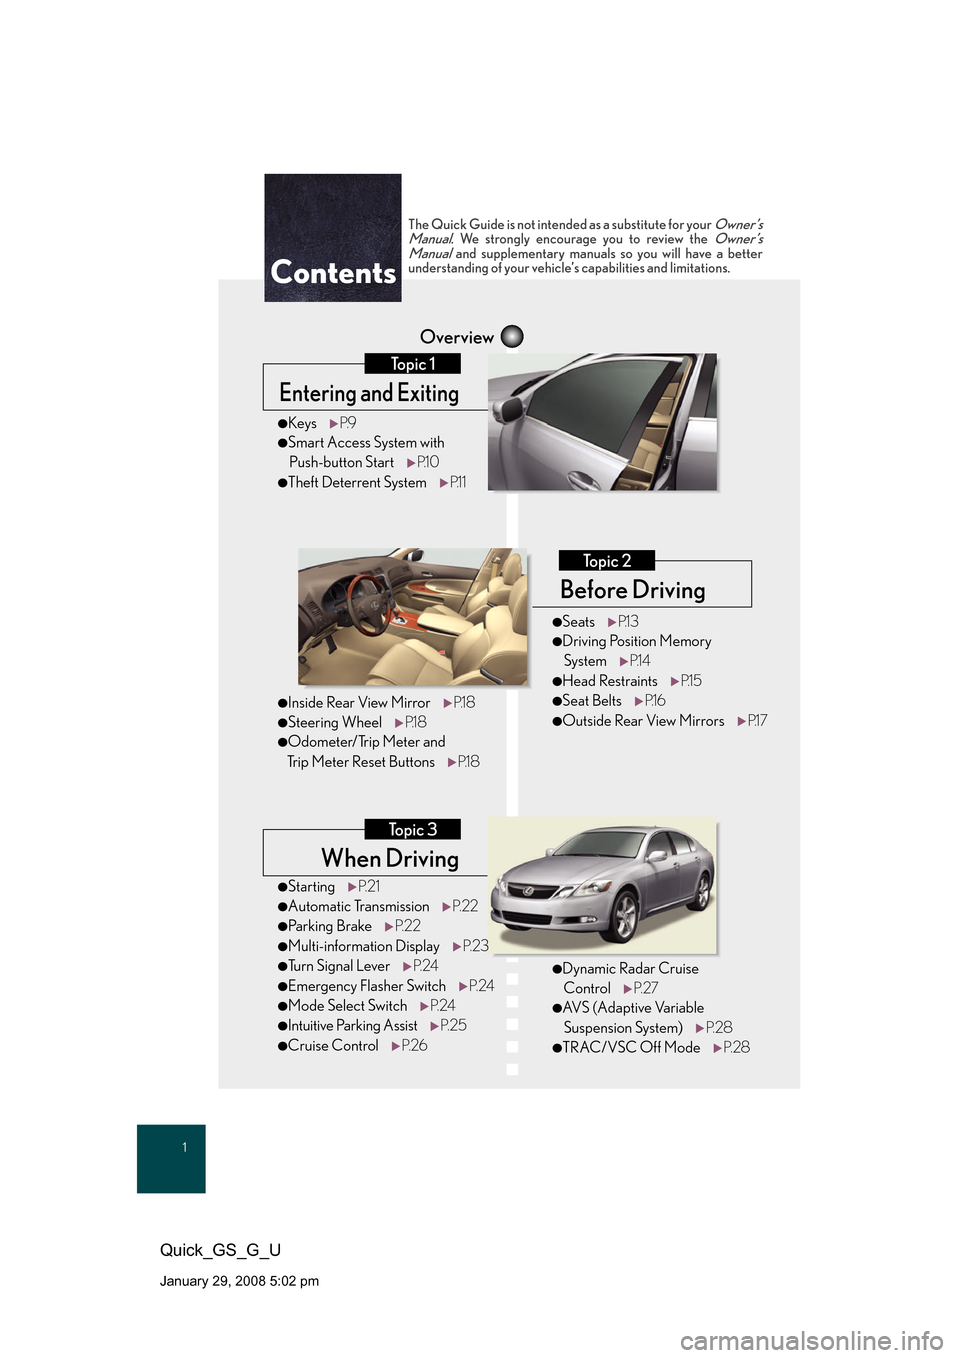 Lexus GS350 2008  Specifications / LEXUS 2008 GS460/350 QUICK GUIDE OWNERS MANUAL (OM30B04U) 1
Quick_GS_G_U
January 29, 2008 5:02 pm
When Driving
Topic 3
Overview
Contents
Entering and Exiting
Topic 1
Before Driving
Topic 2
●StartingP. 2 1
●Automatic Transmission P. 2 2
●Parking BrakeP.